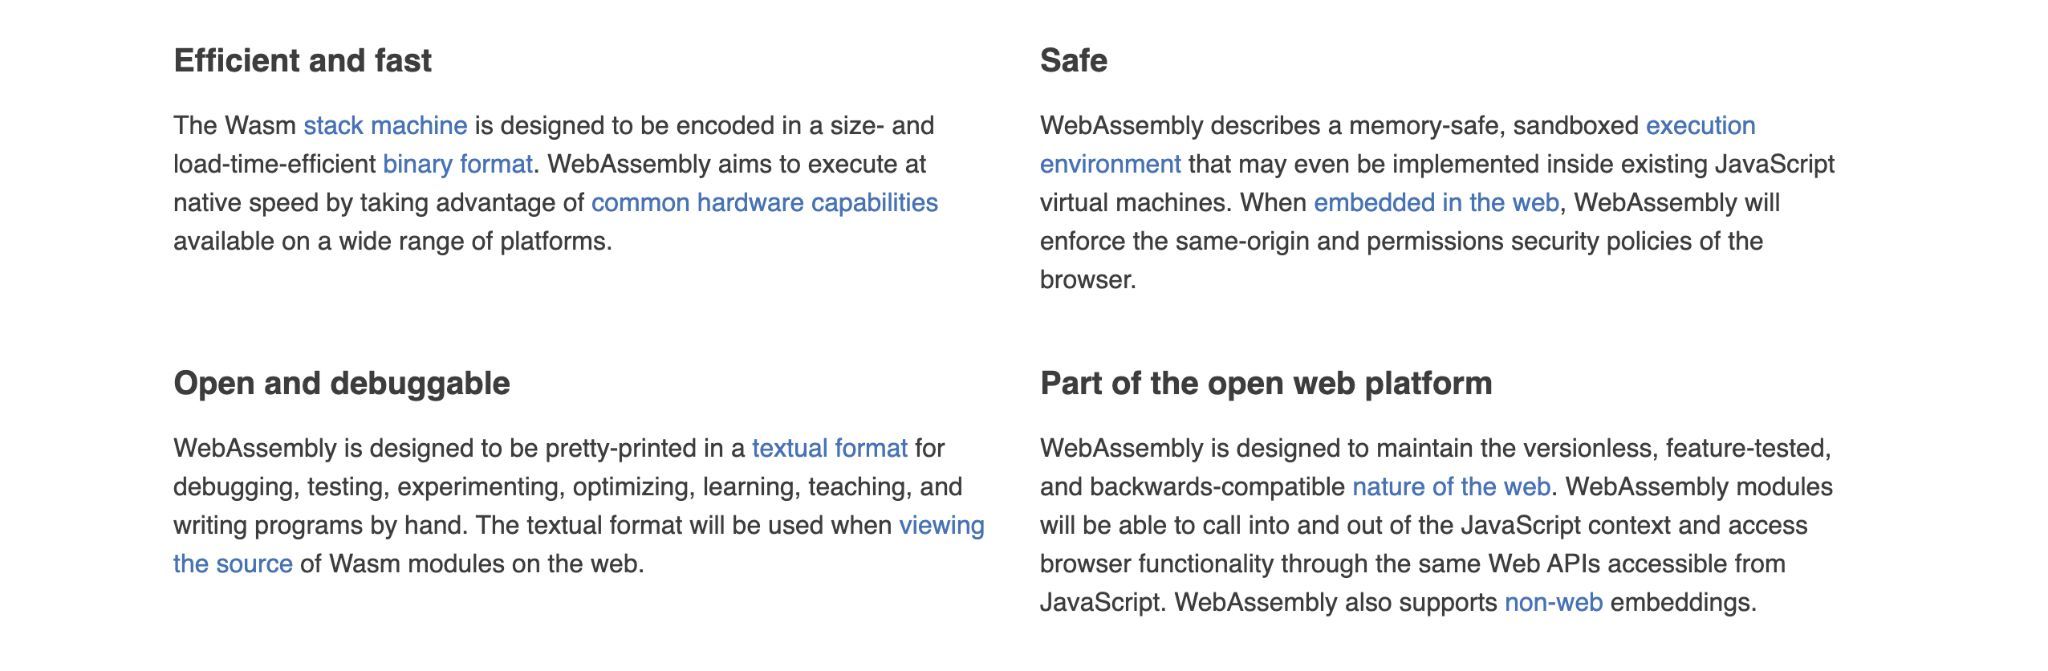 WebAssembly features